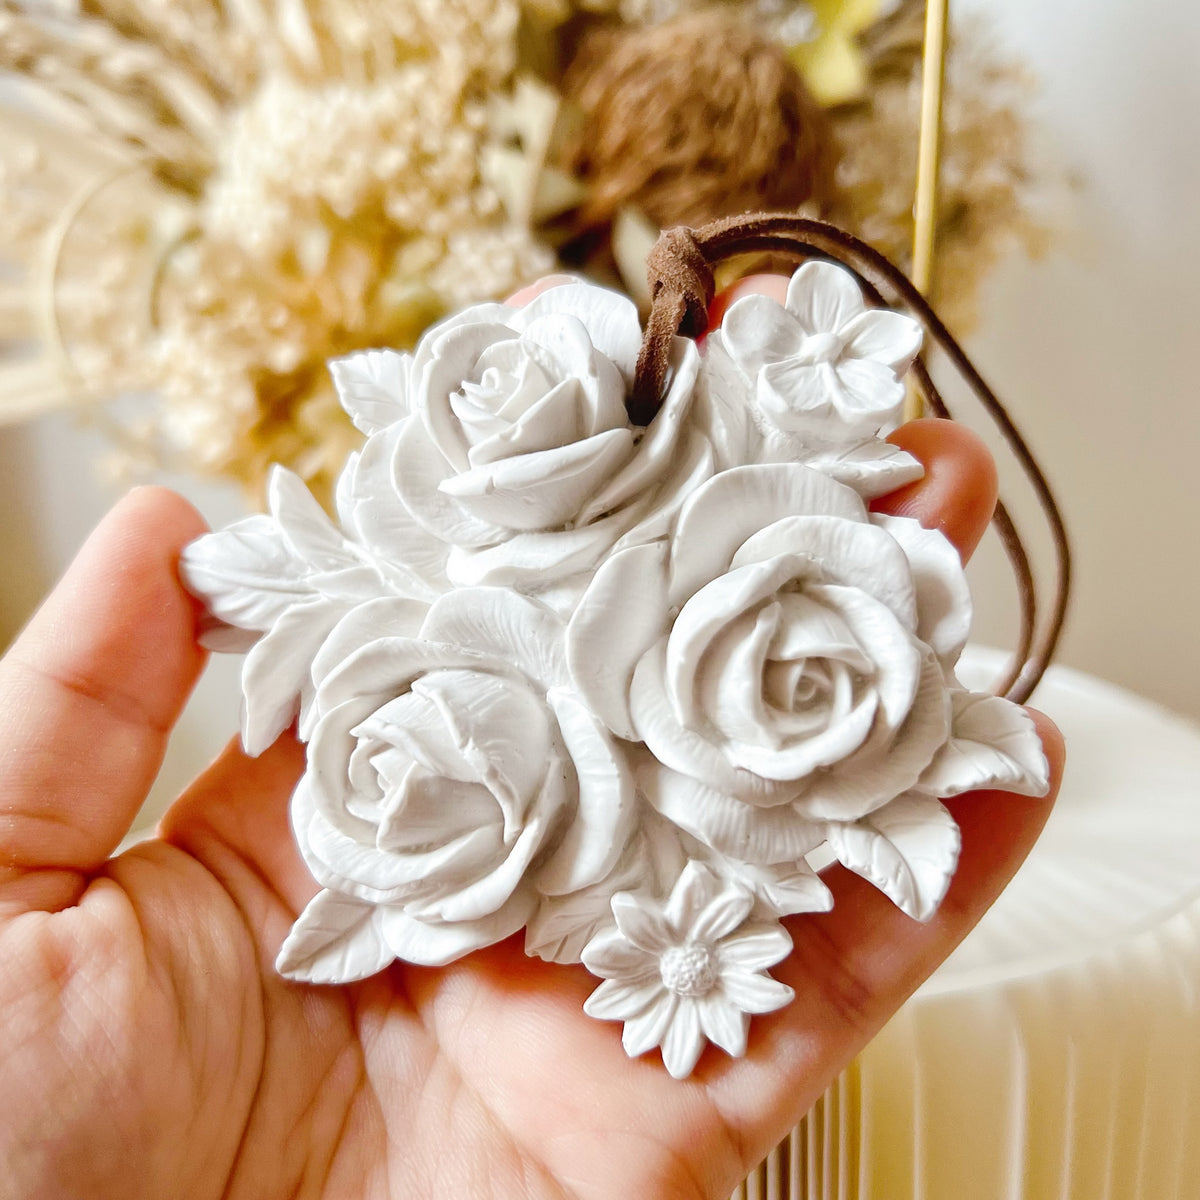 Handmade Rose Flower Home Hanging Diffuser | LMJ Candles